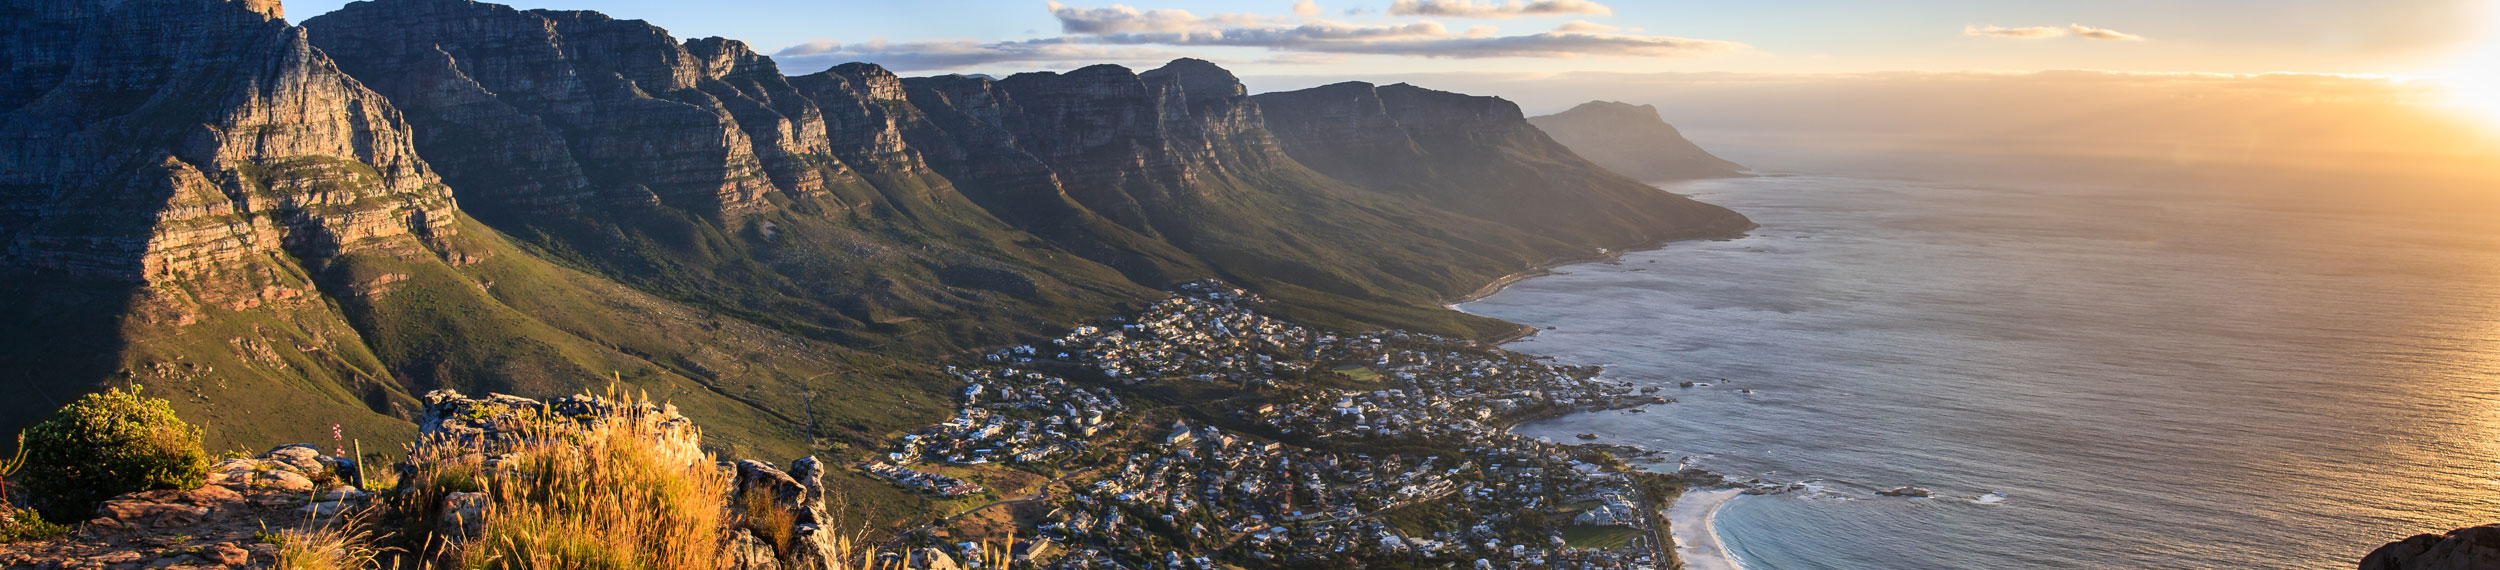 Aerial landscape shot of Table mountain and the coast in Cape Town, South Africa